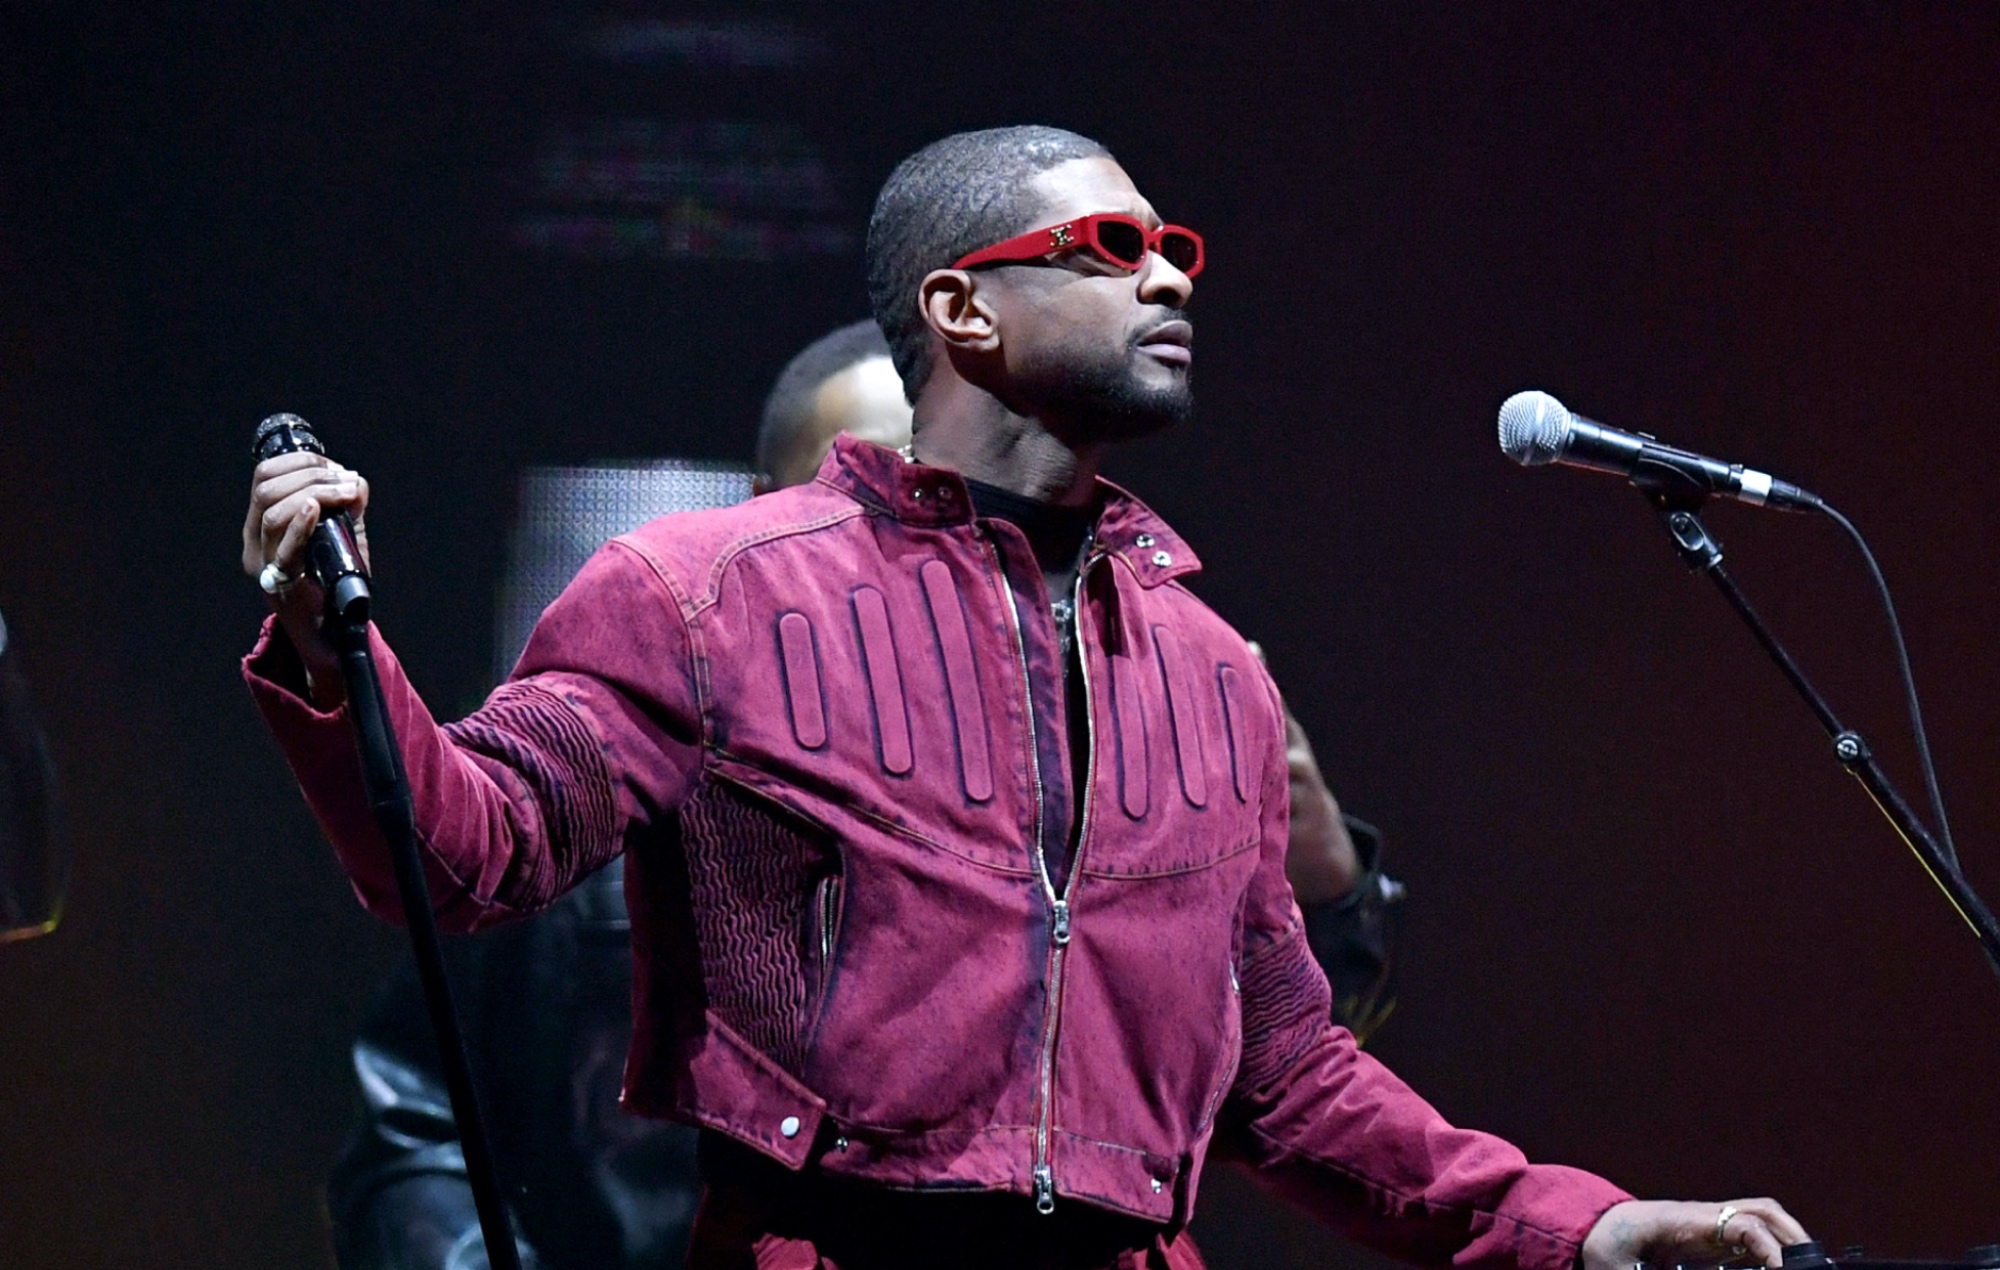 Usher performing live on stage